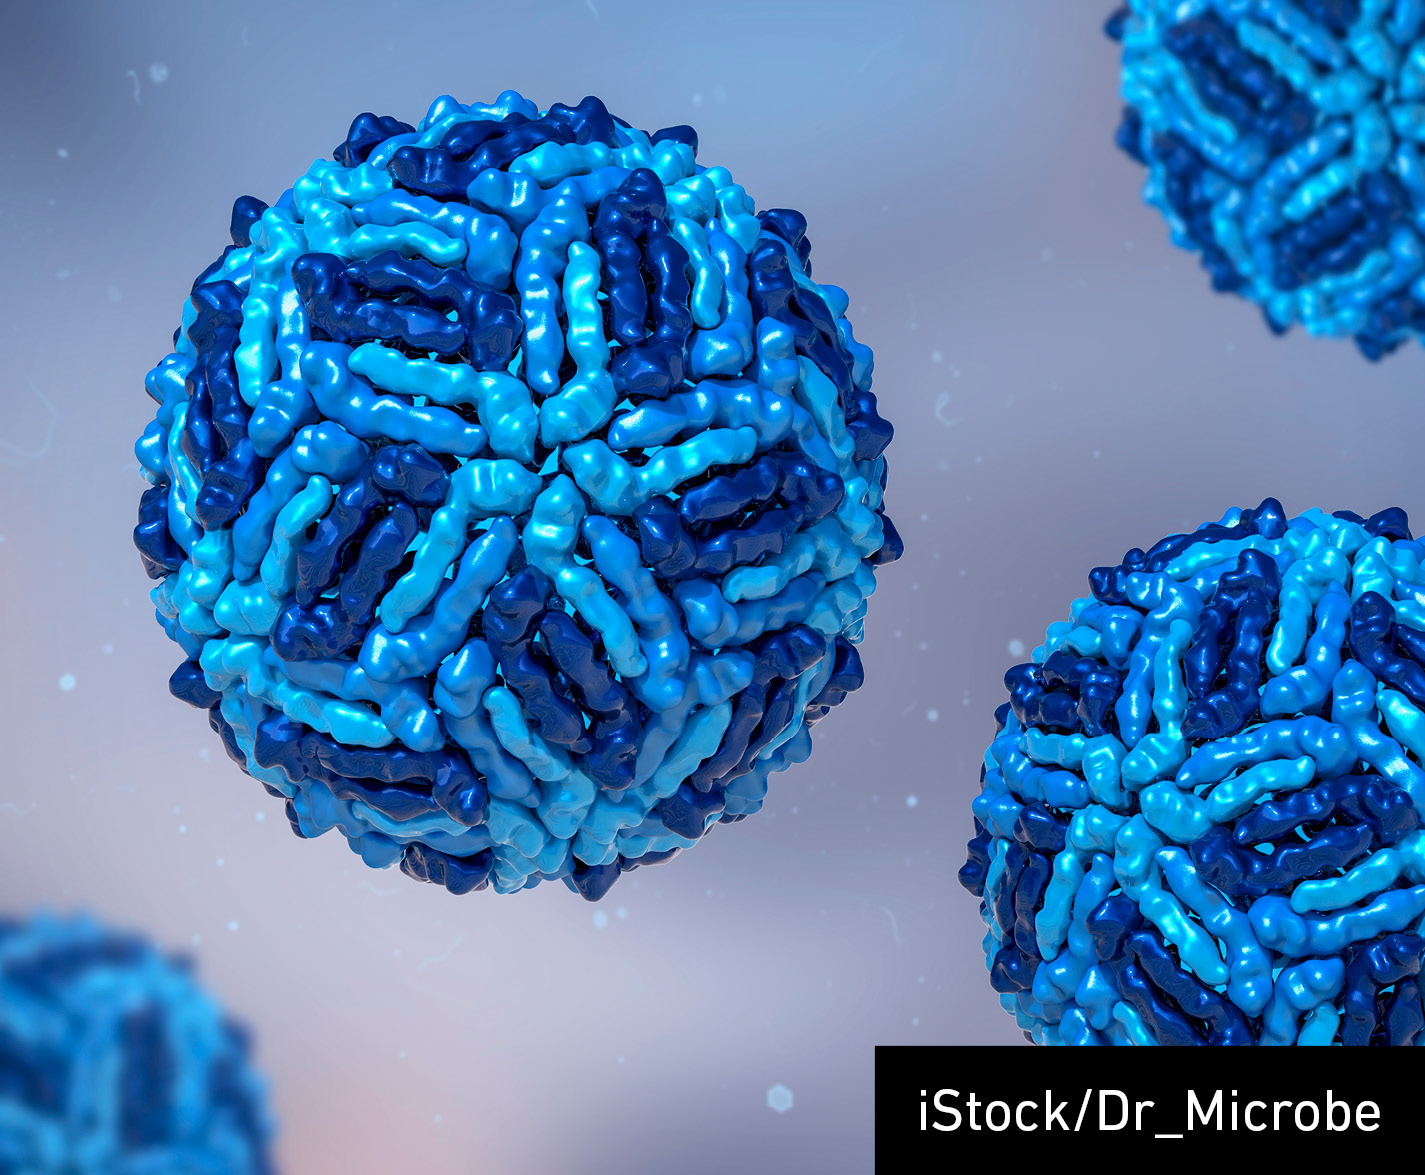 West Nile virus, WNV, 3D illustration. A virus that is transmitted by mosquito and causes West Nile fever